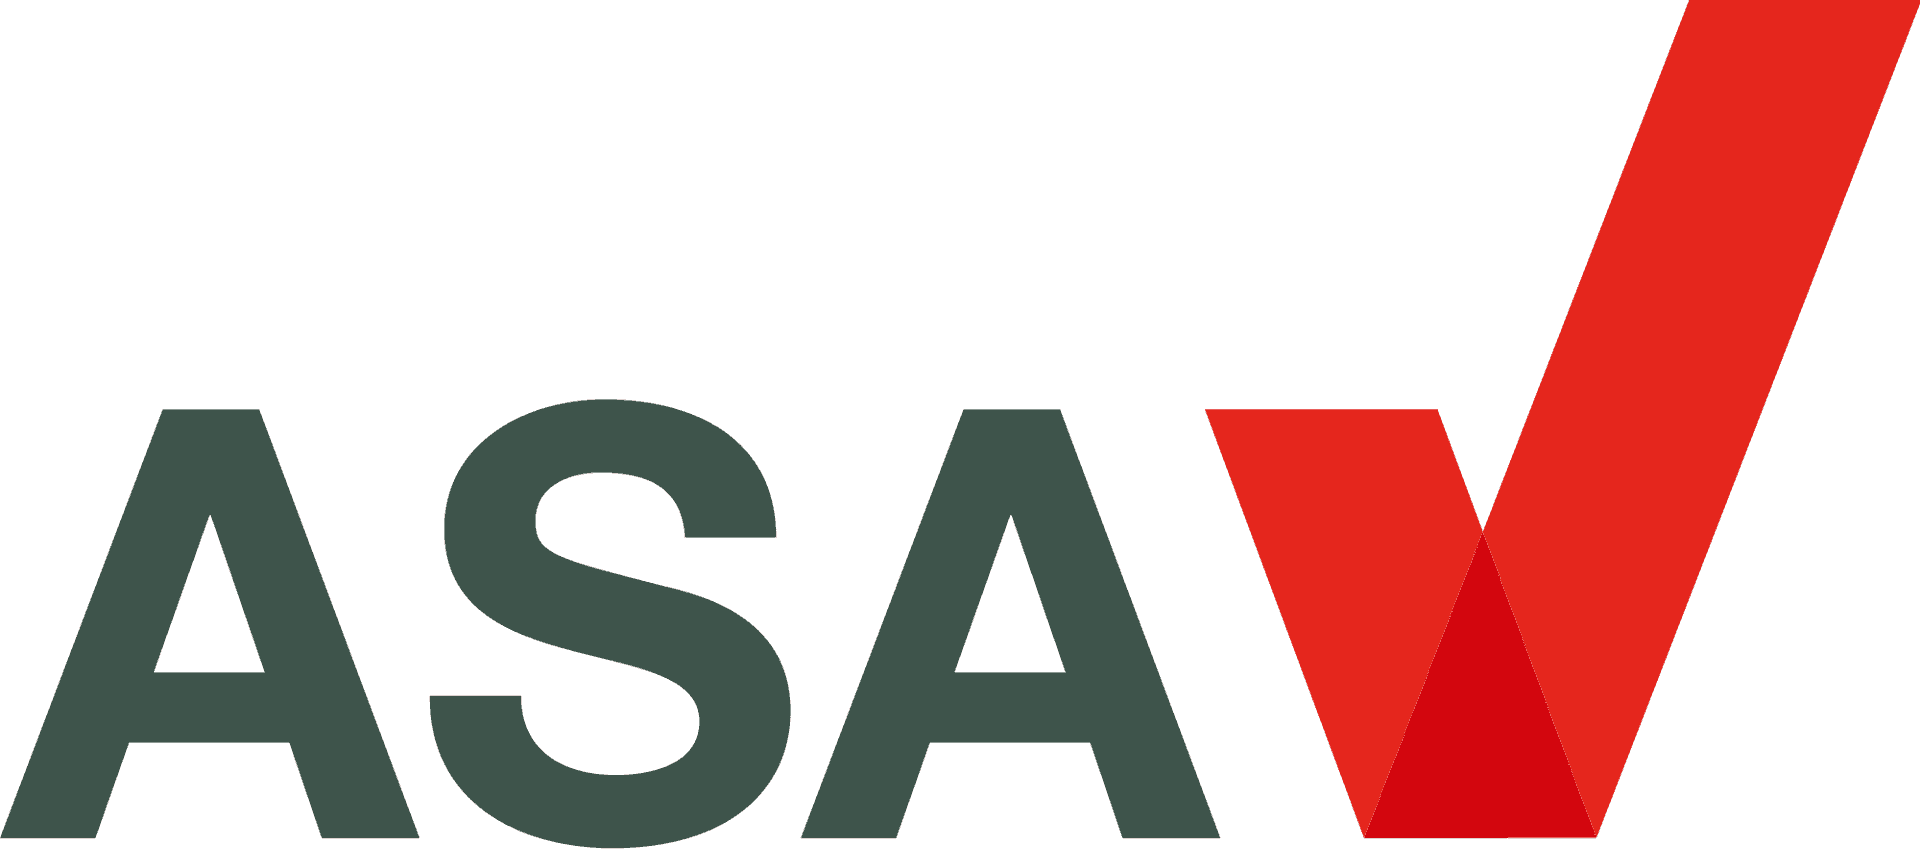 A S A Logo Red Arrow PNG image